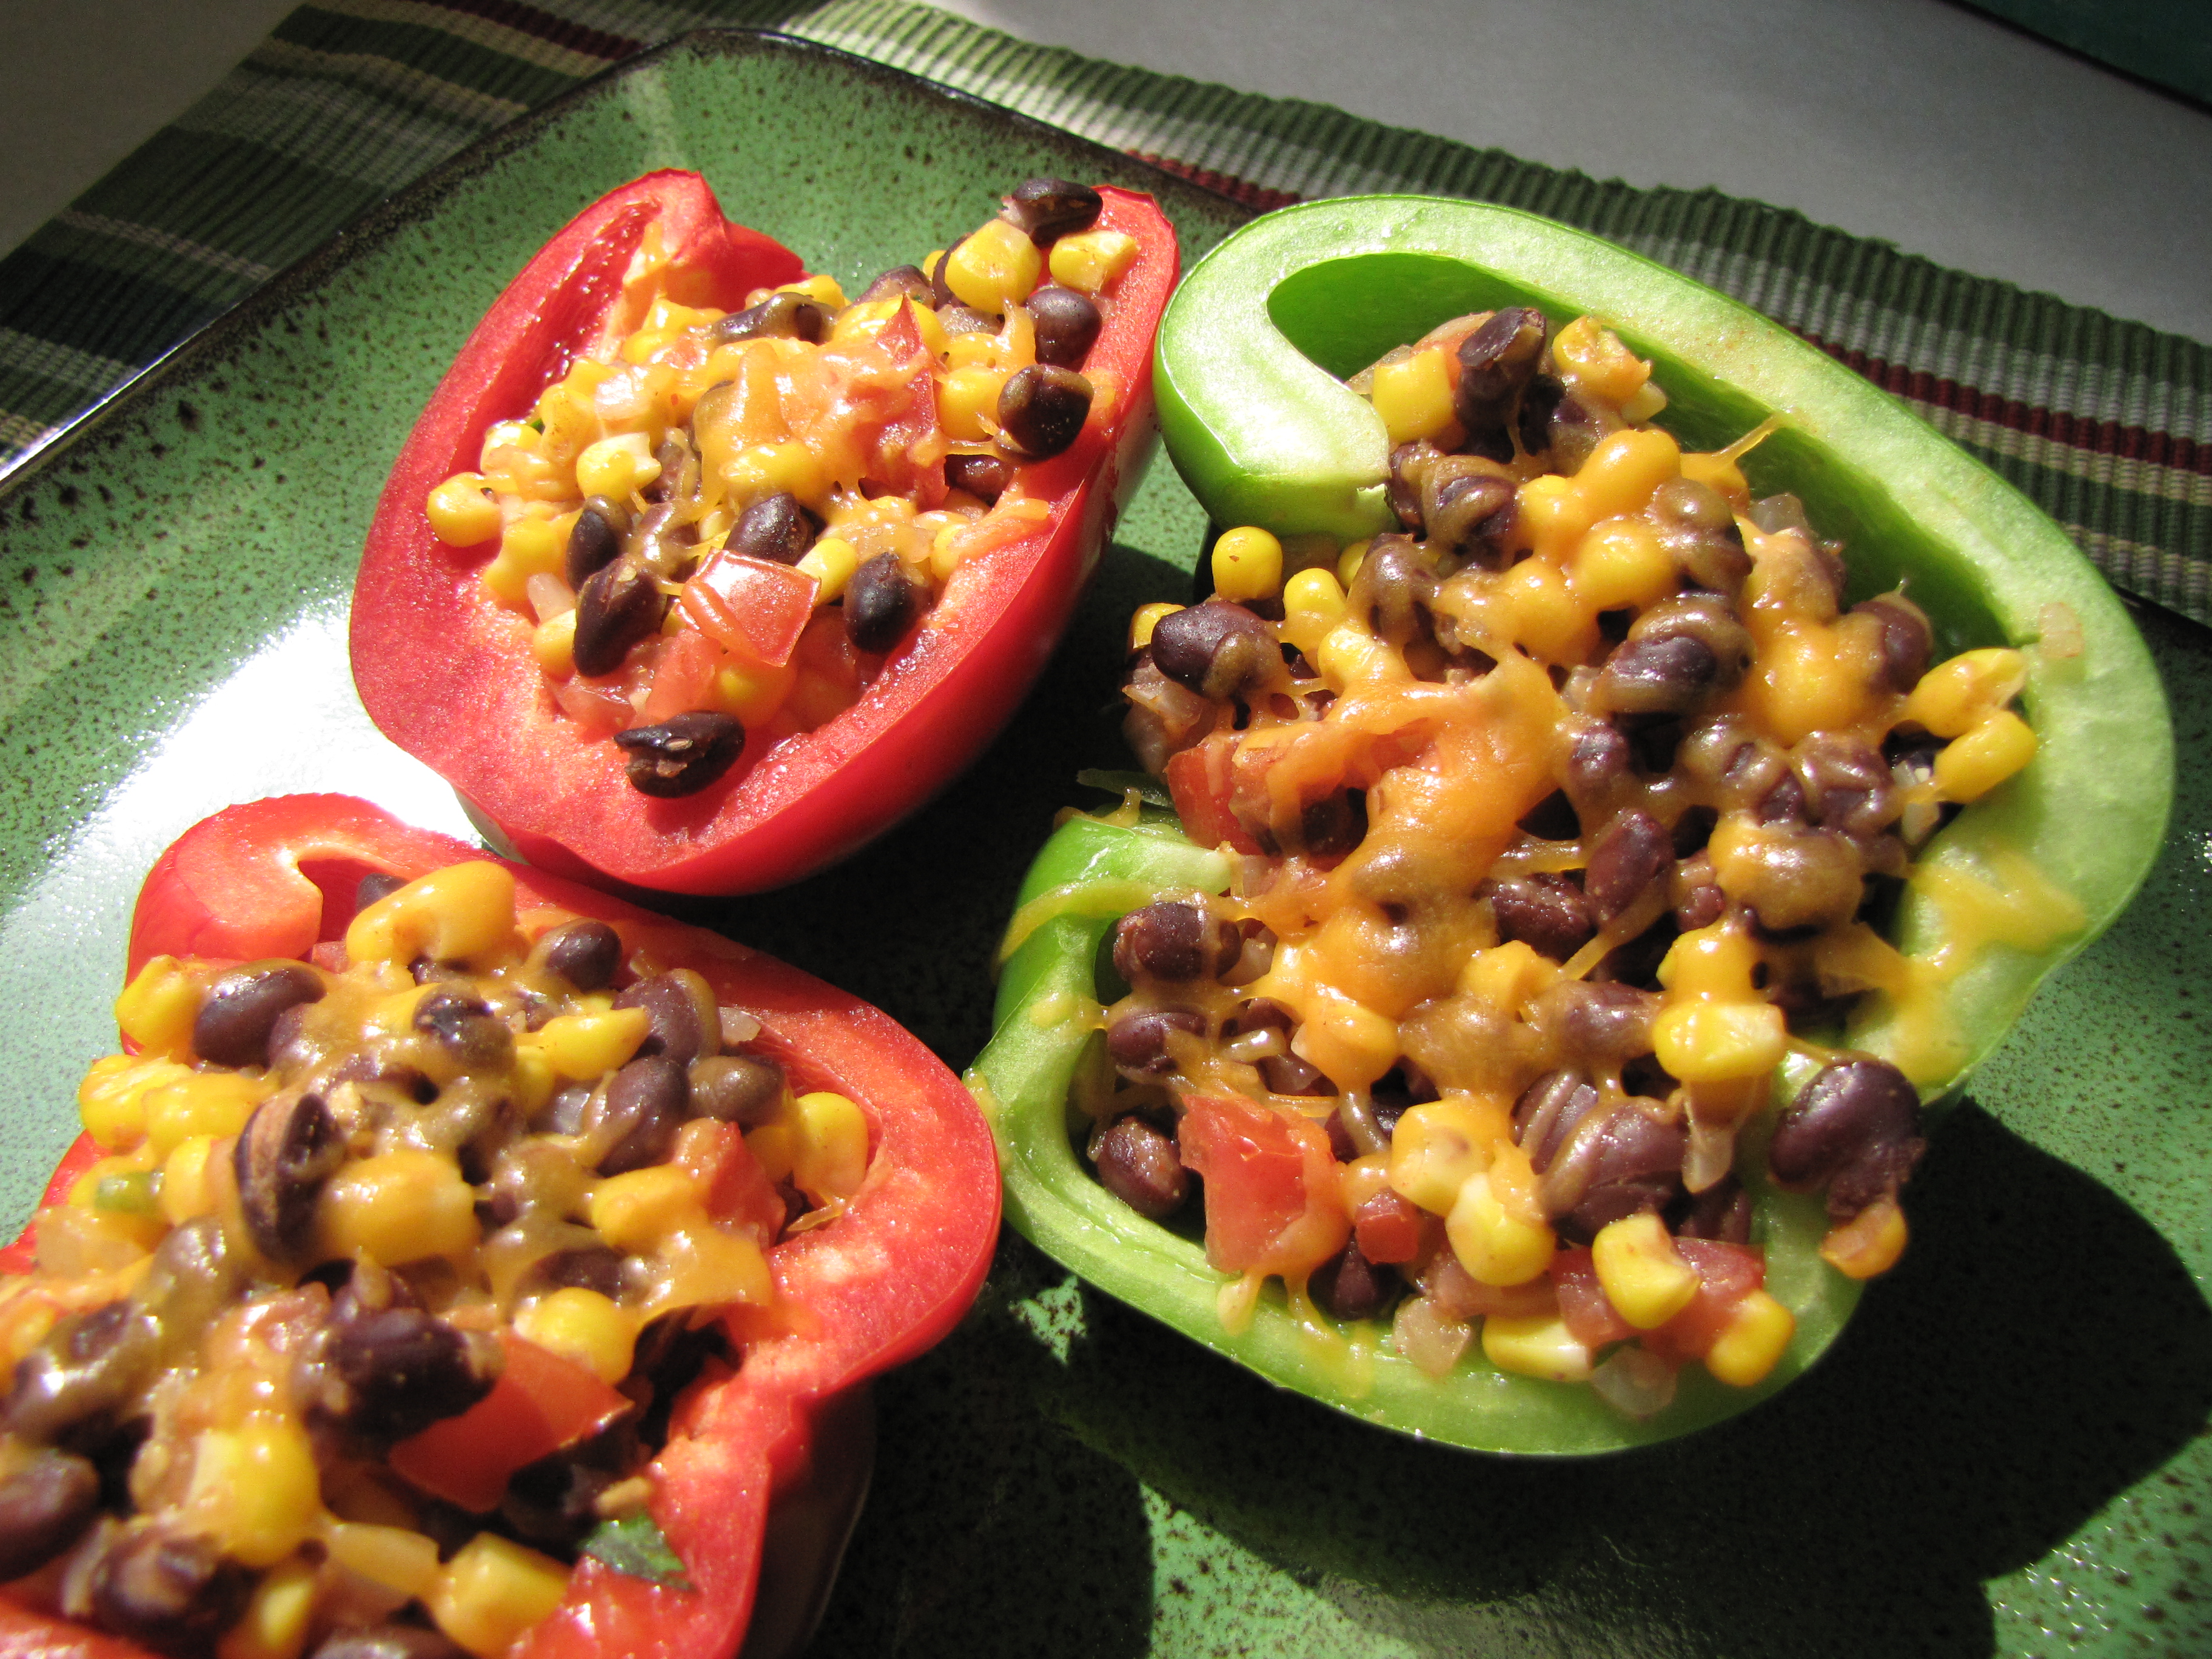 Enjoy bell peppers stuffed with your favorite mixture. (NDSU photo)